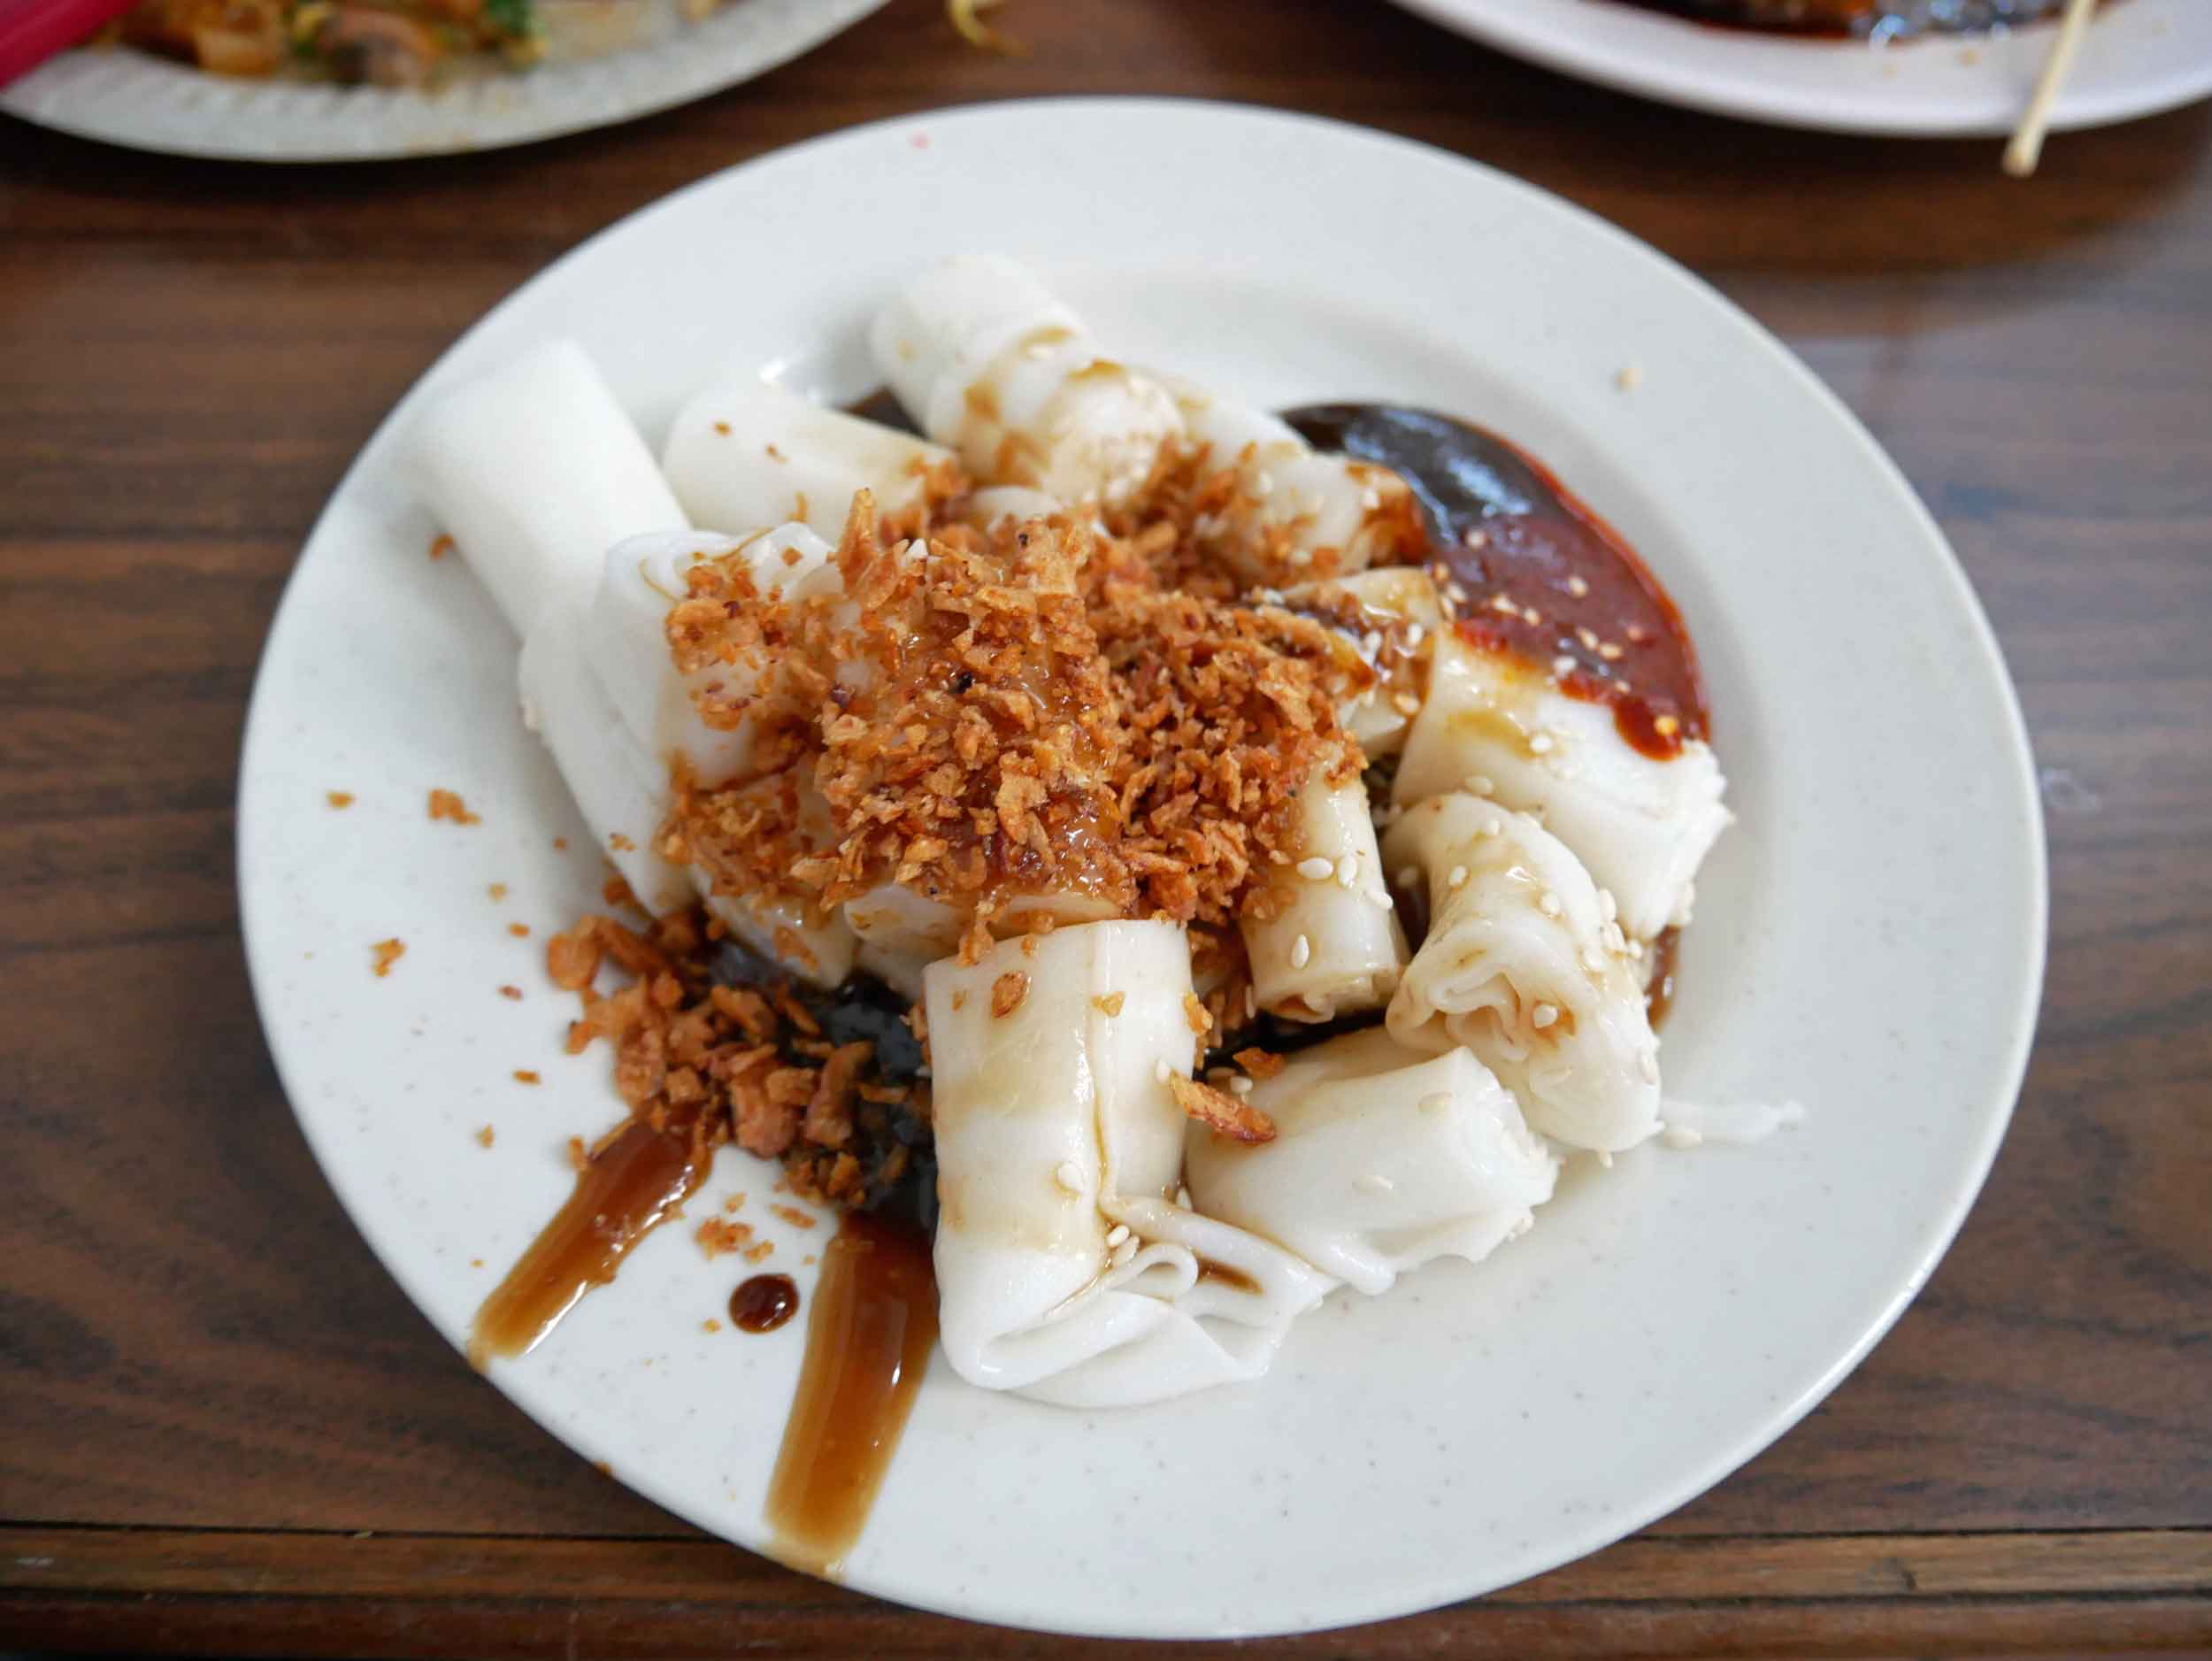  We tried the traditional Cantonese dish of  chee cheong fun , rice noodle rolls with shrimp. 